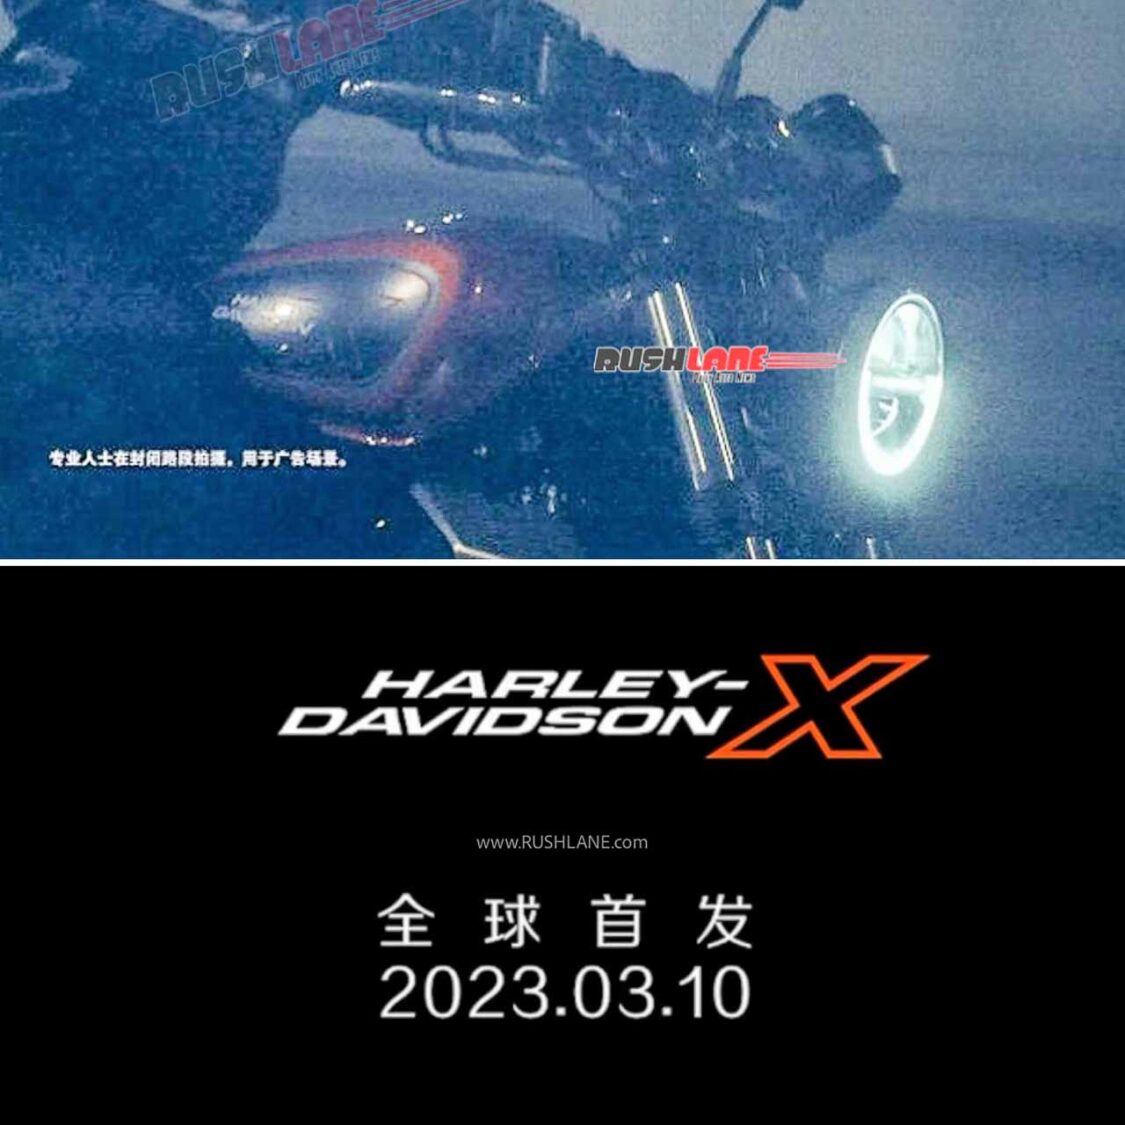 Harley Davidson X350 and X500 launch on 10th March 2023